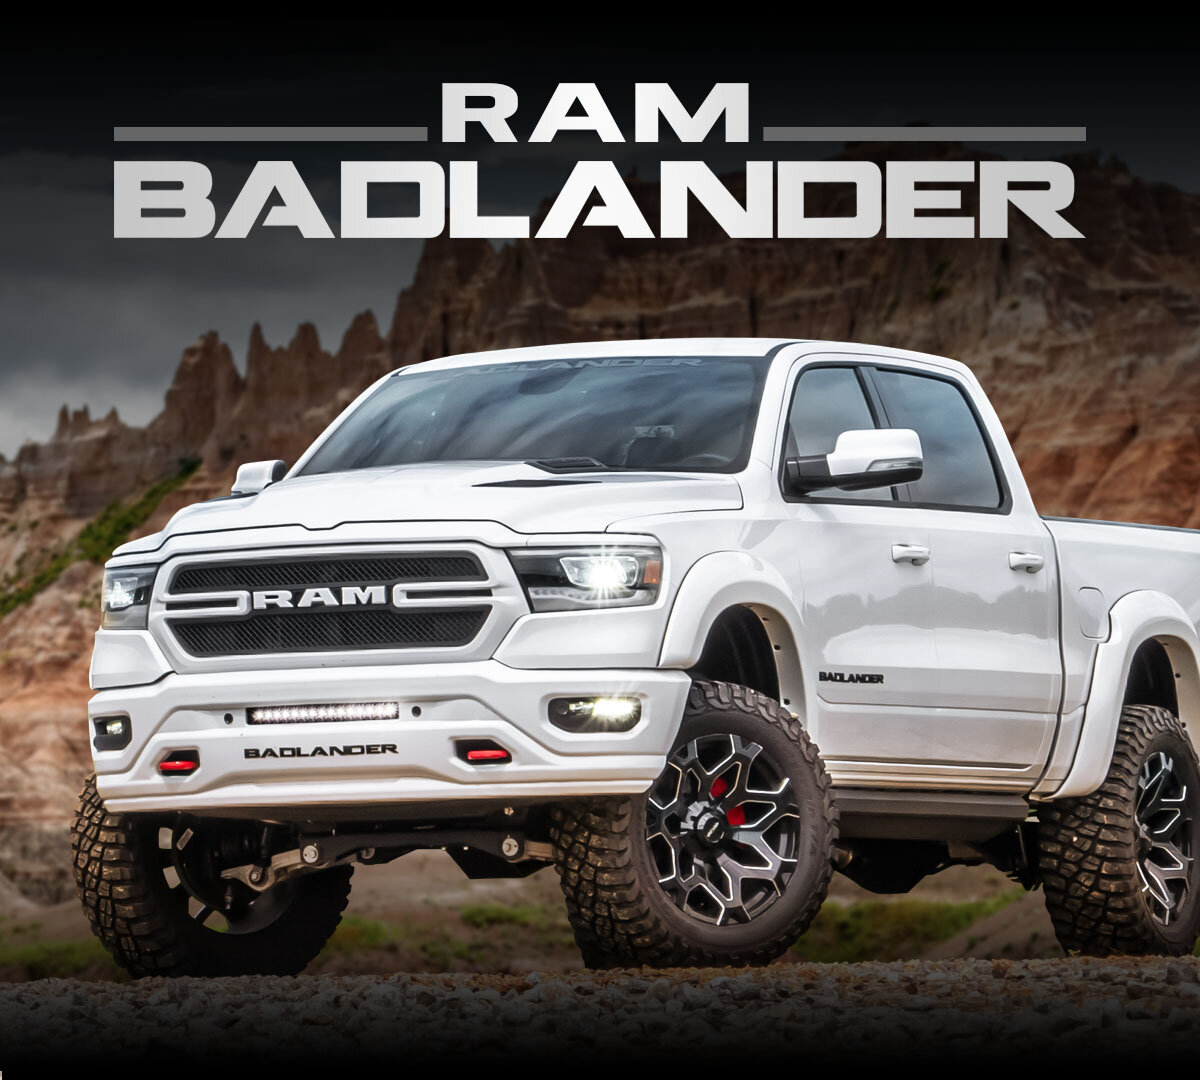 RAM 1500 Badlander A Comprehensive Overview of Features and Specs